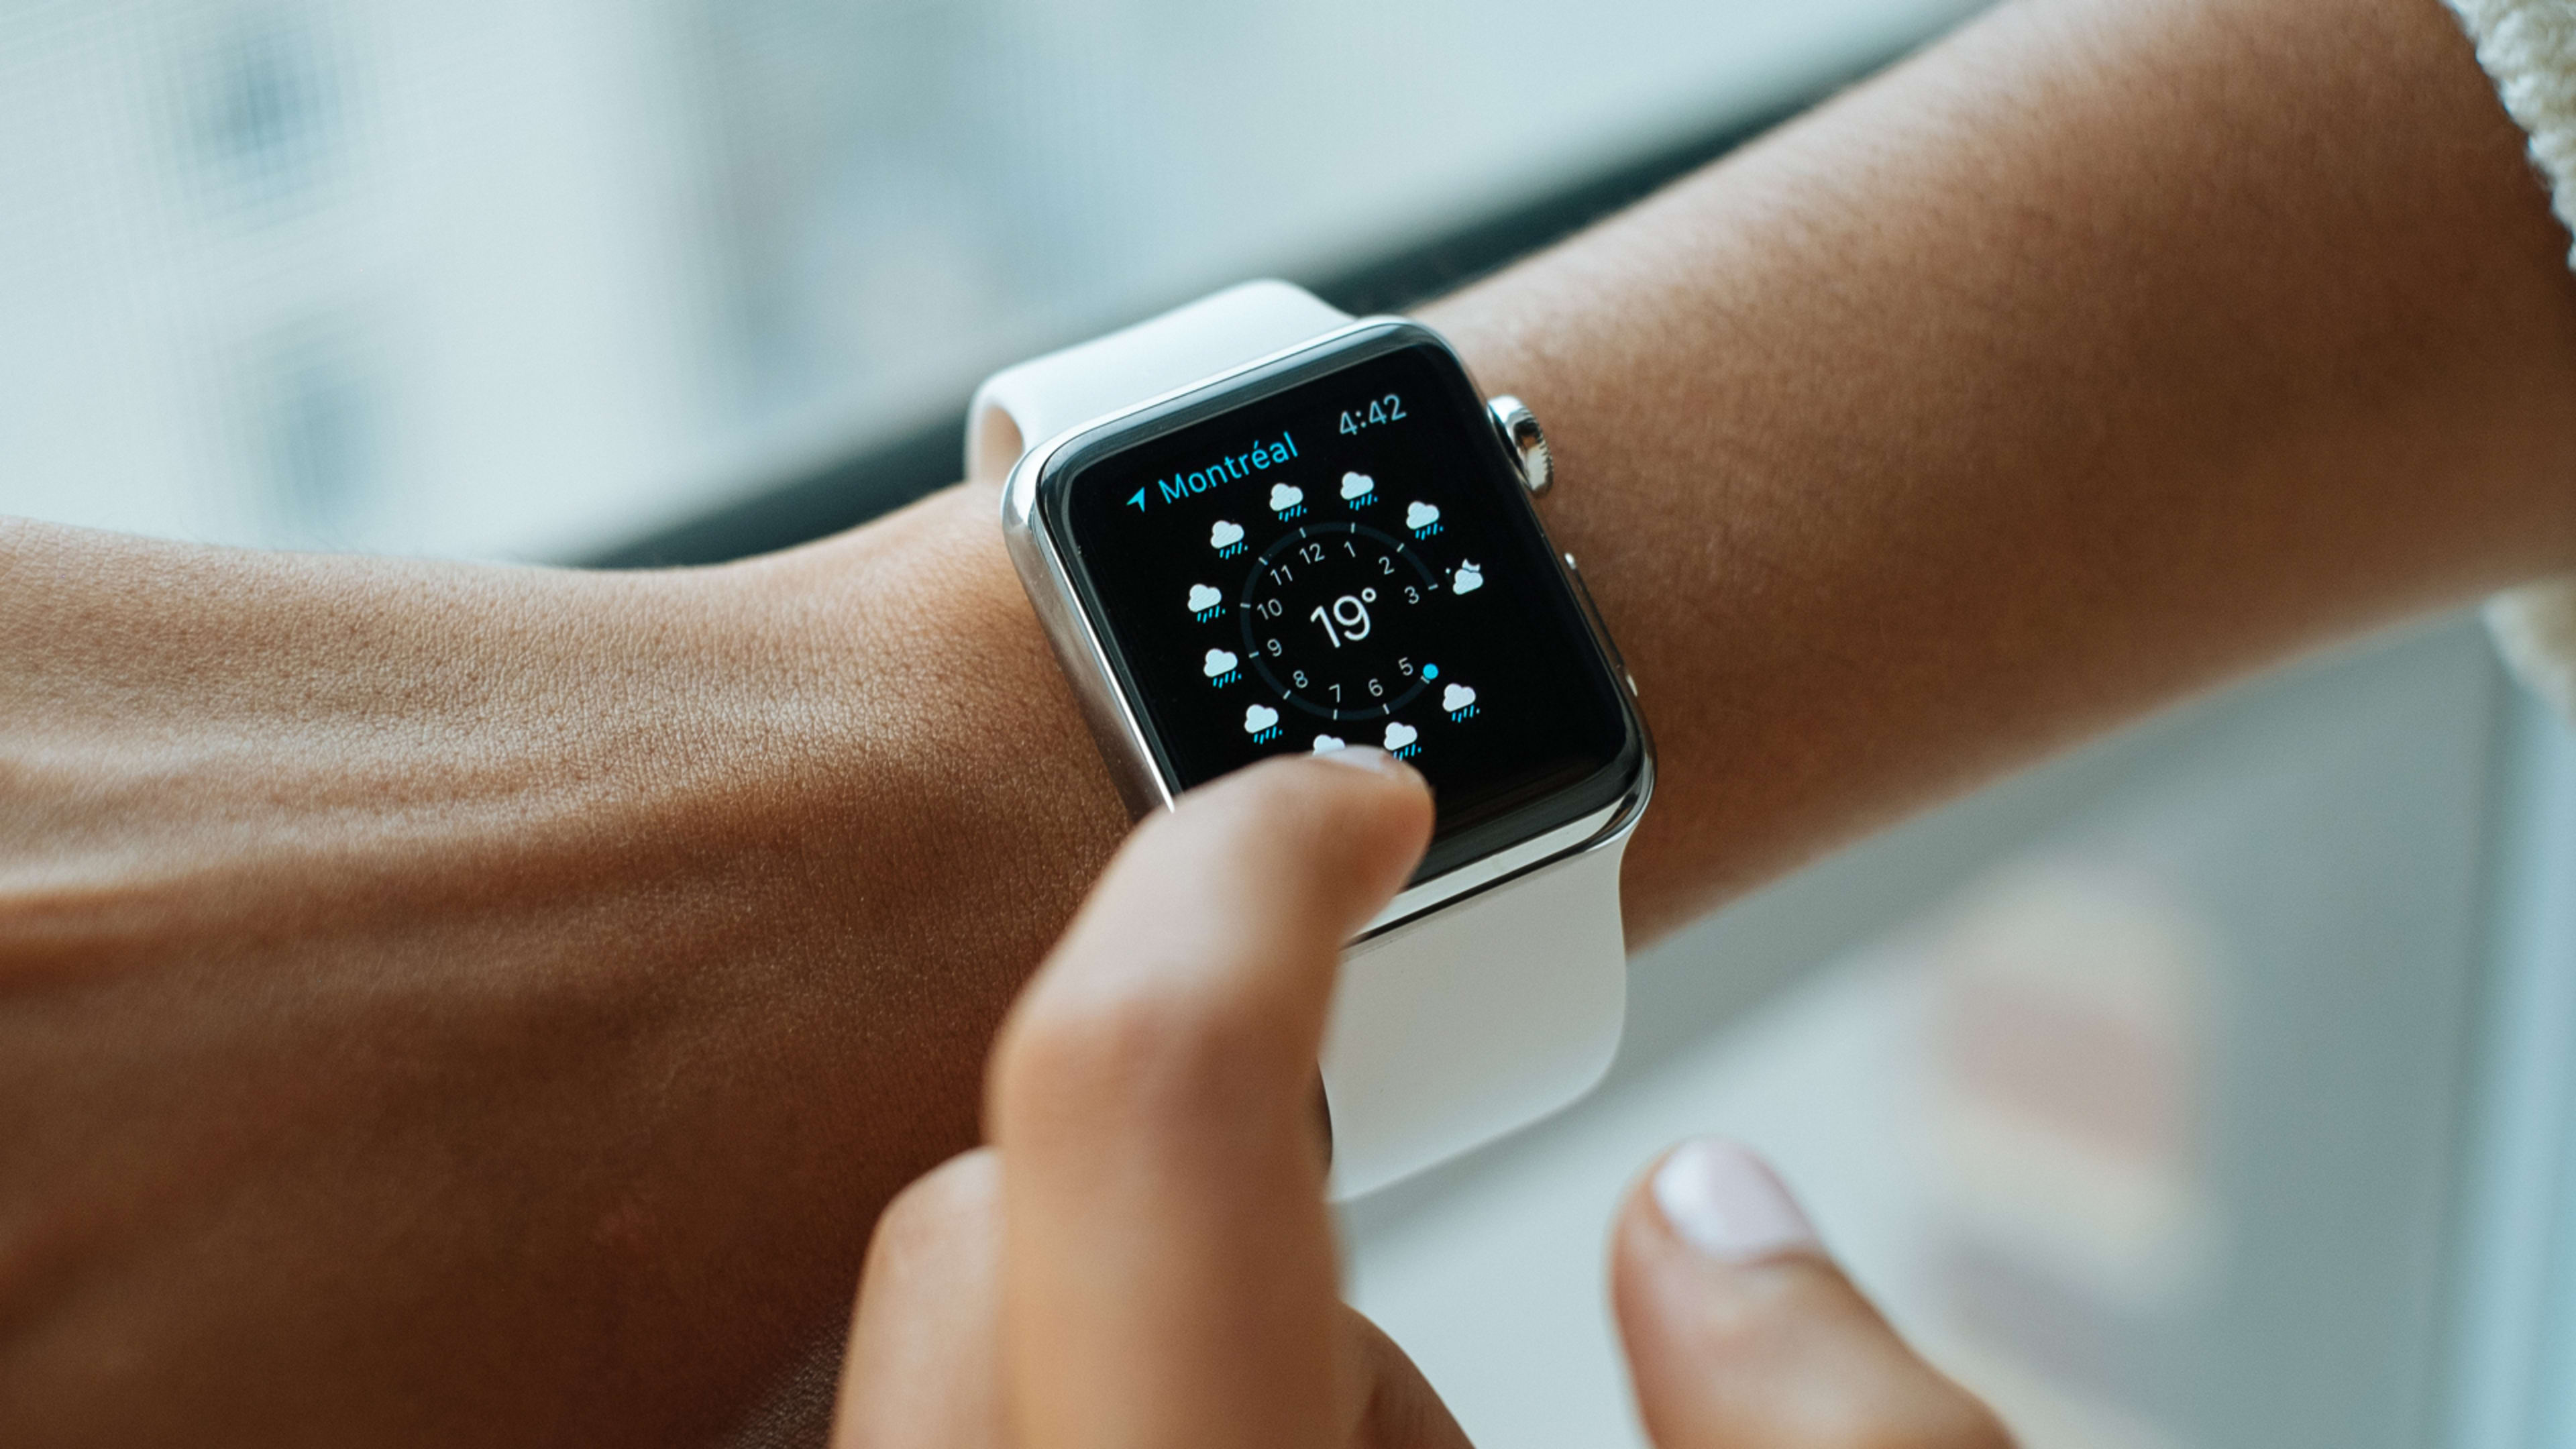 Users: Apple Watch is getting sick at the hospital